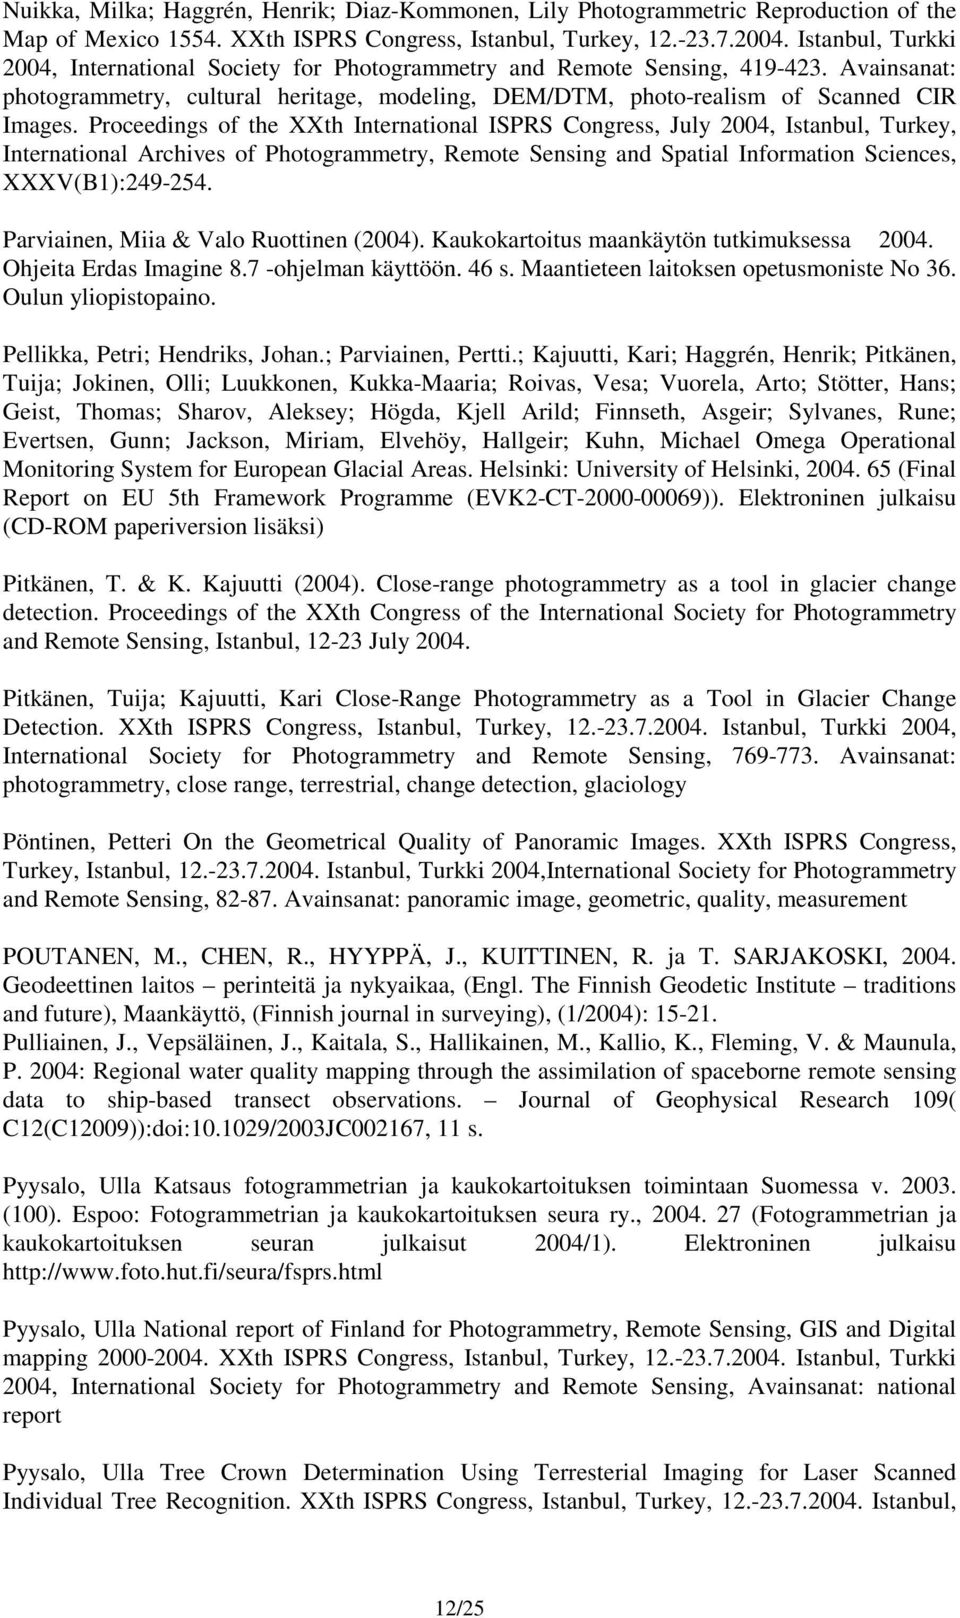 Proceedings of the XXth International ISPRS Congress, July 2004, Istanbul, Turkey, International Archives of Photogrammetry, Remote Sensing and Spatial Information Sciences, XXXV(B1):249-254.